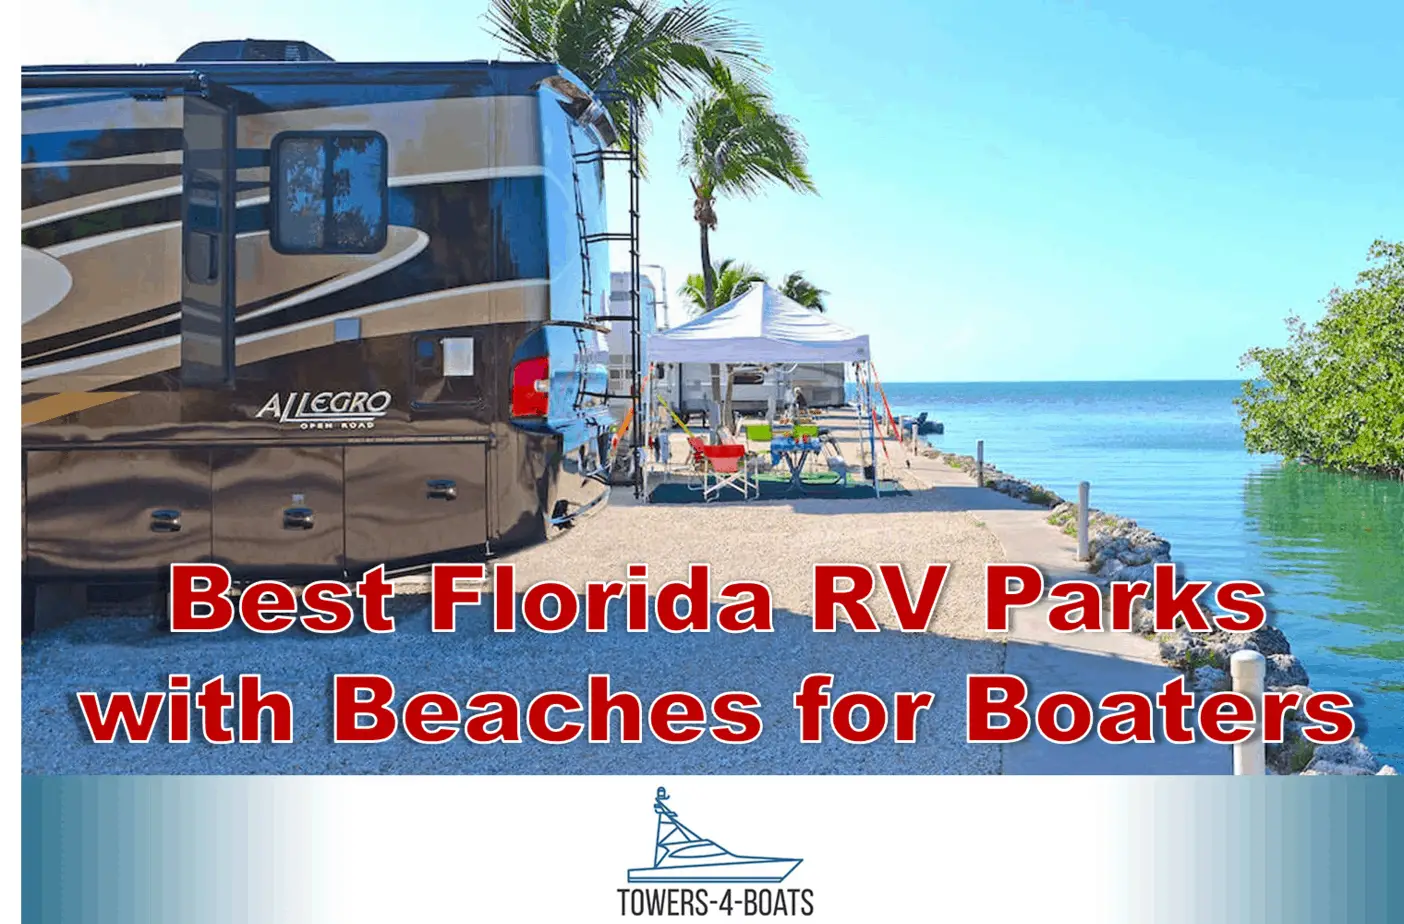 Best Florida RV Parks with Beaches for Boaters